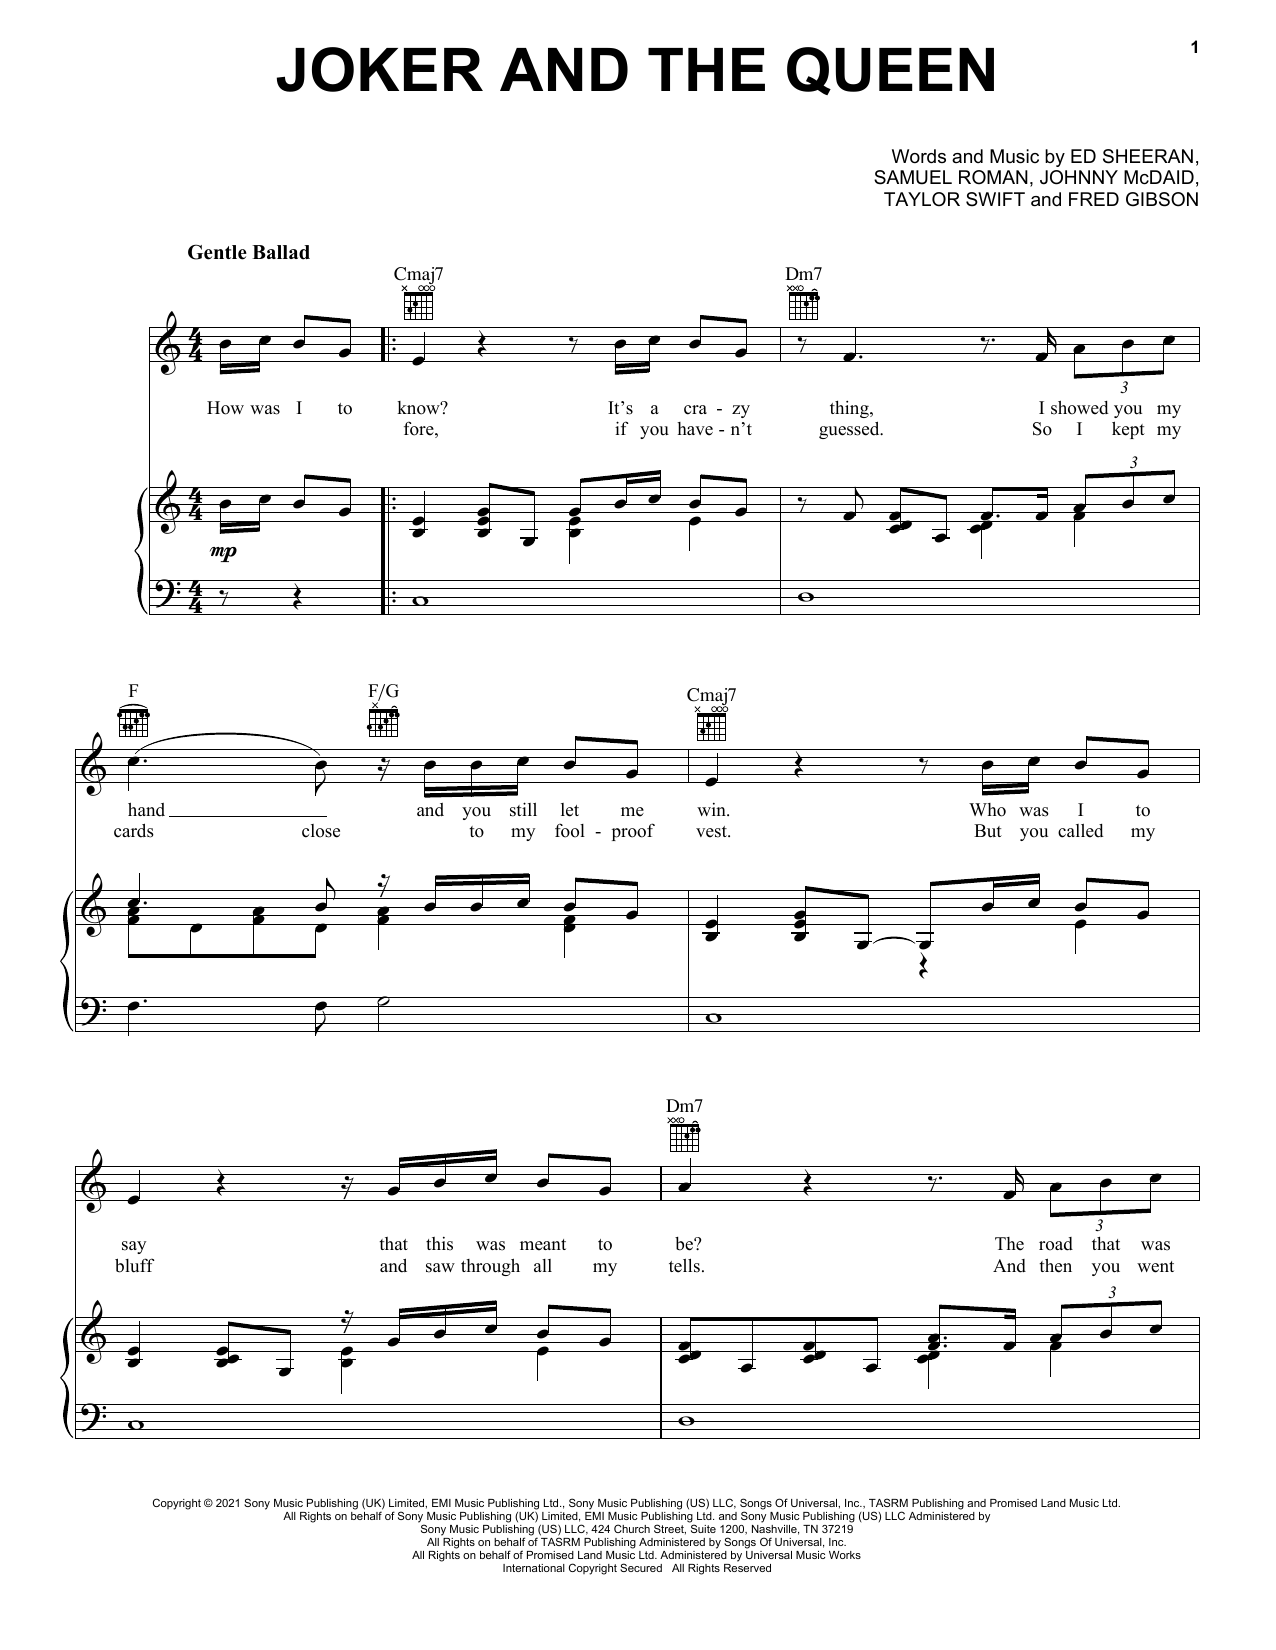 Ed Sheeran & Taylor Swift The Joker And The Queen sheet music notes and chords. Download Printable PDF.